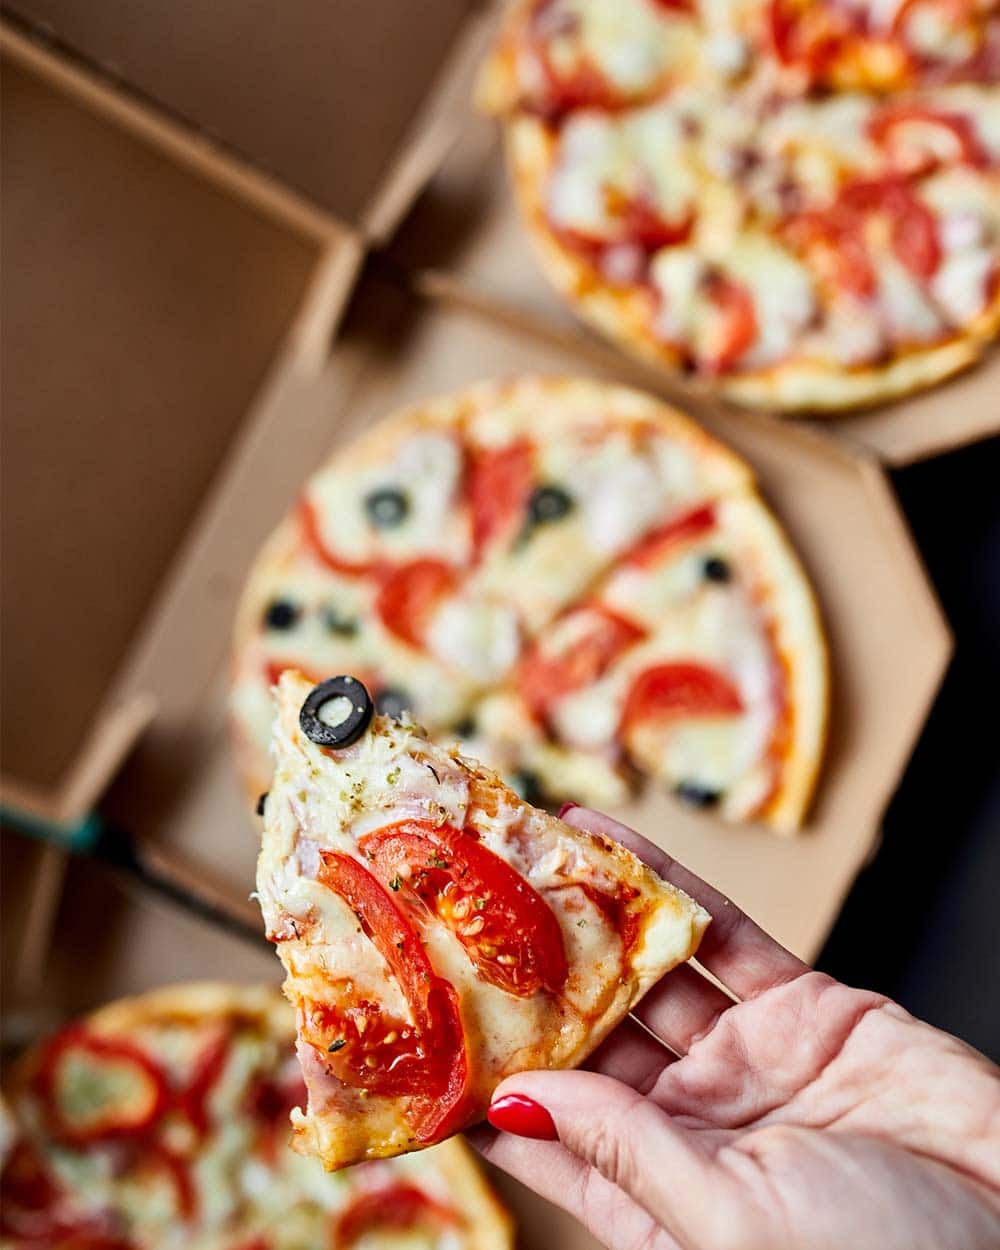 Reheating a pizza in its box usually means there will always be a hint of cardboard in the taste, small though it might be. To avoid it altogether, ditch the box.